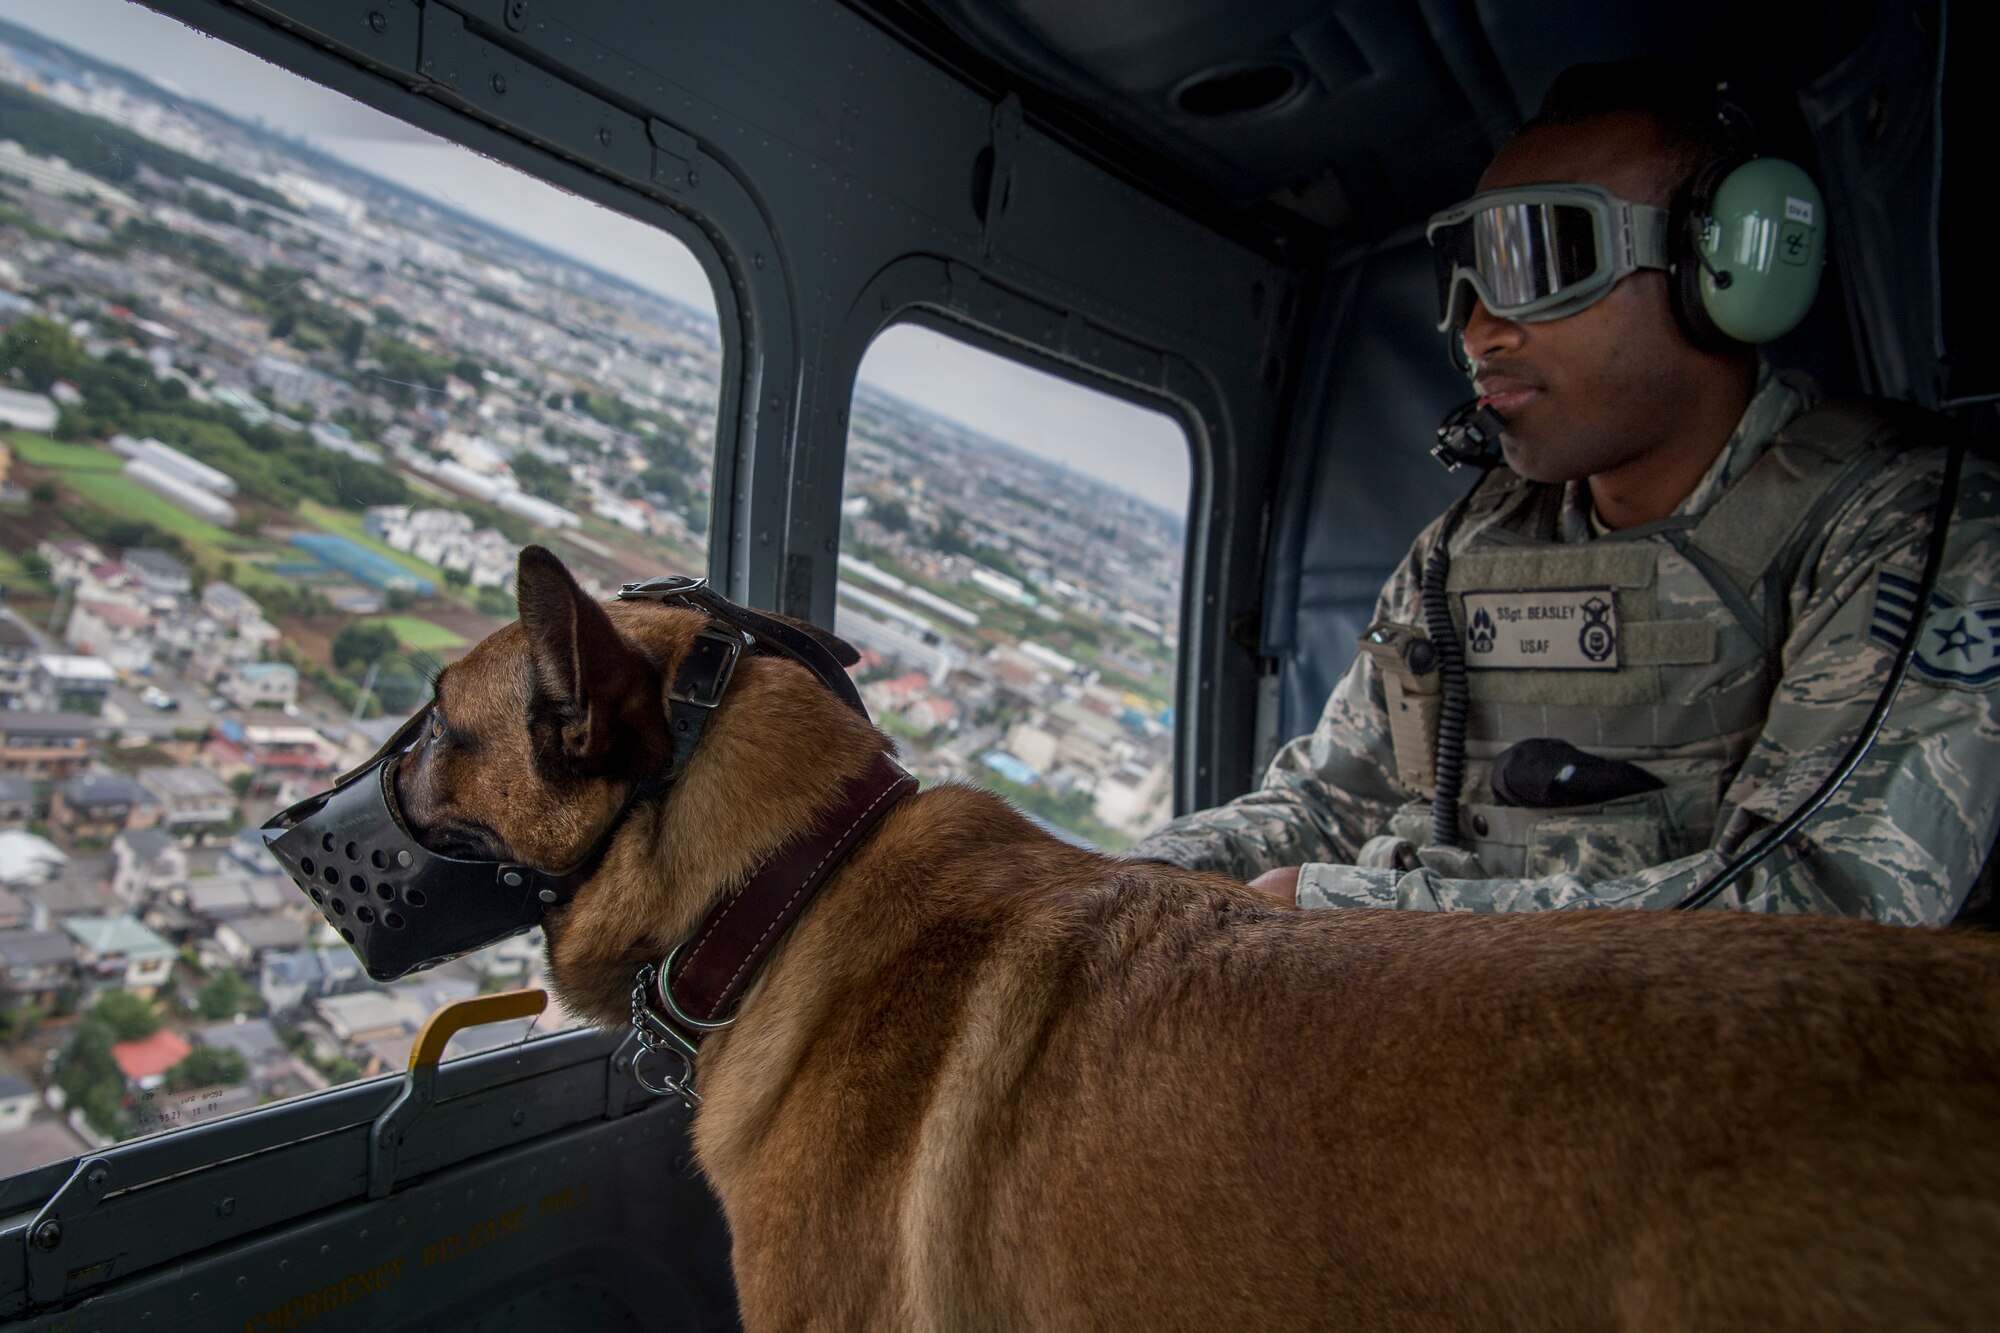 Staff Sgt. Terrell Beasley, 374th Security Forces Squadron military working dog handler, and Fflorida, 374 SFS MWD, look out the window of a UH-1N helicopter during a 459th Airlift Squadron MWD UH-1N helicopter familiarization flight July 26, 2018, at Yokota Air Base, Japan.